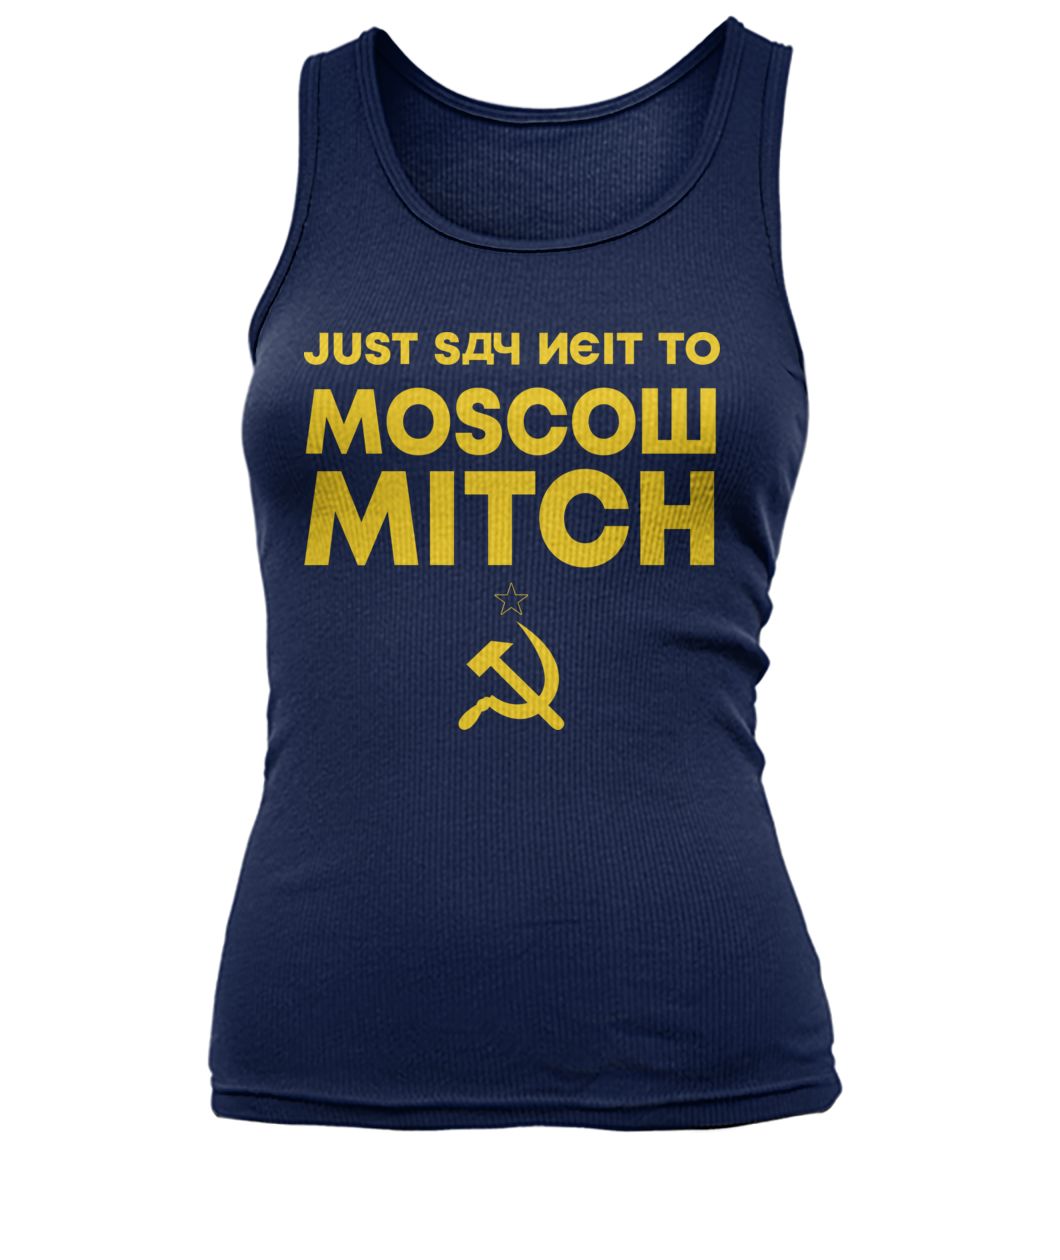 Just say neit to moscow mitch women's tank top